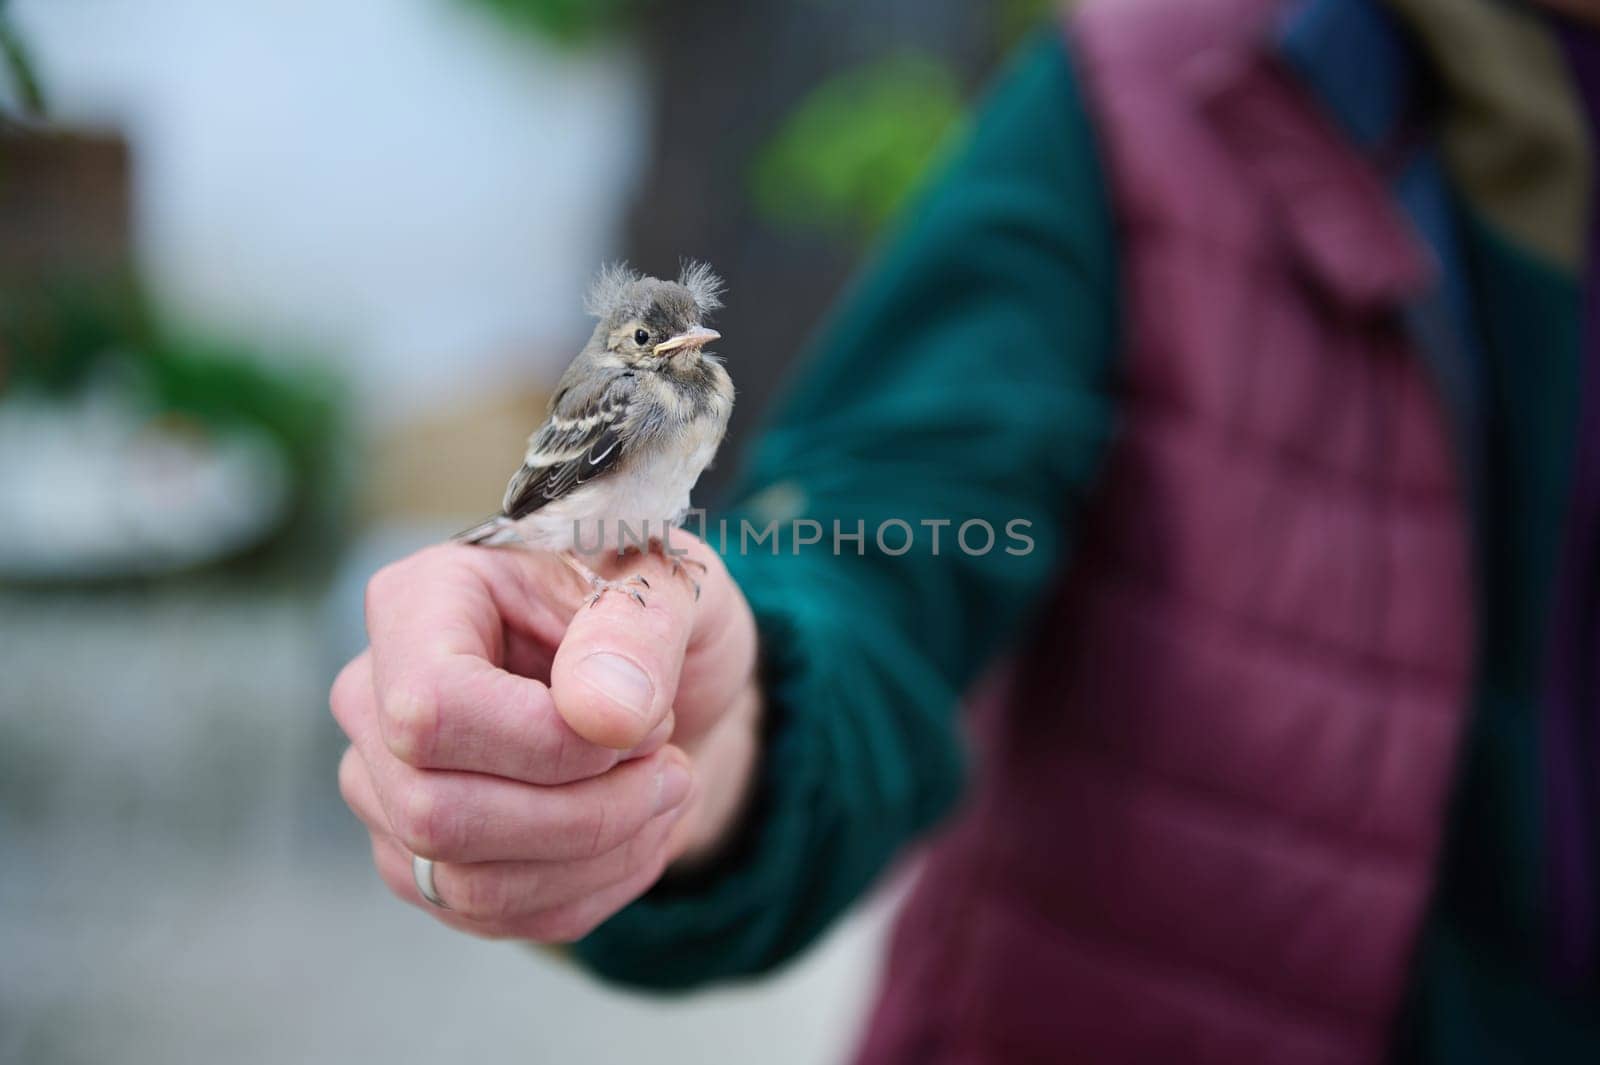 Close-up view of a little baby bird sitting in the hands of a man. People and animals themes by artgf